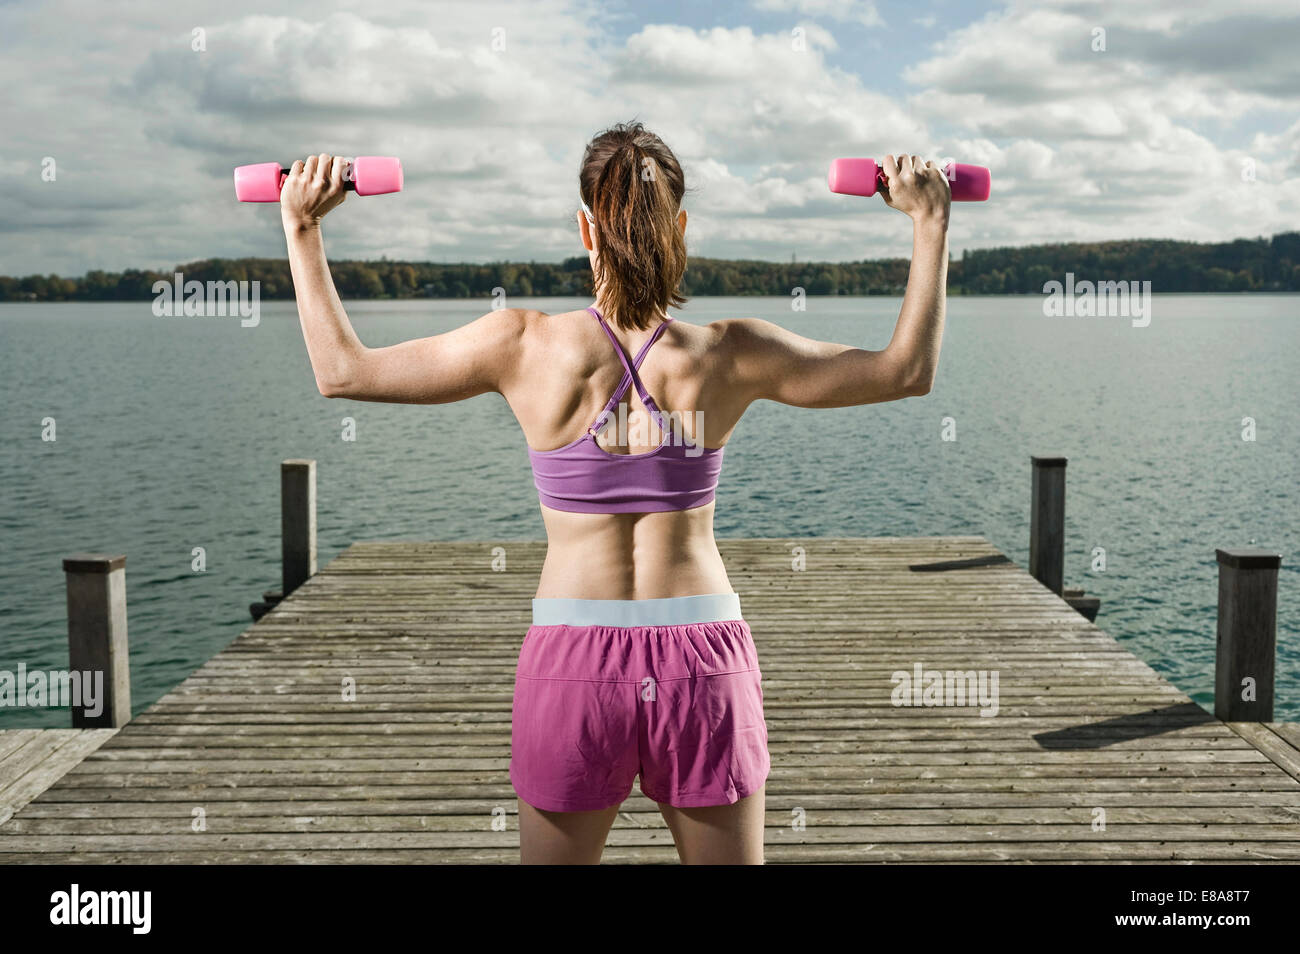 Woman training with dumbbells, Woerthsee, Bavaria, Germany Stock Photo